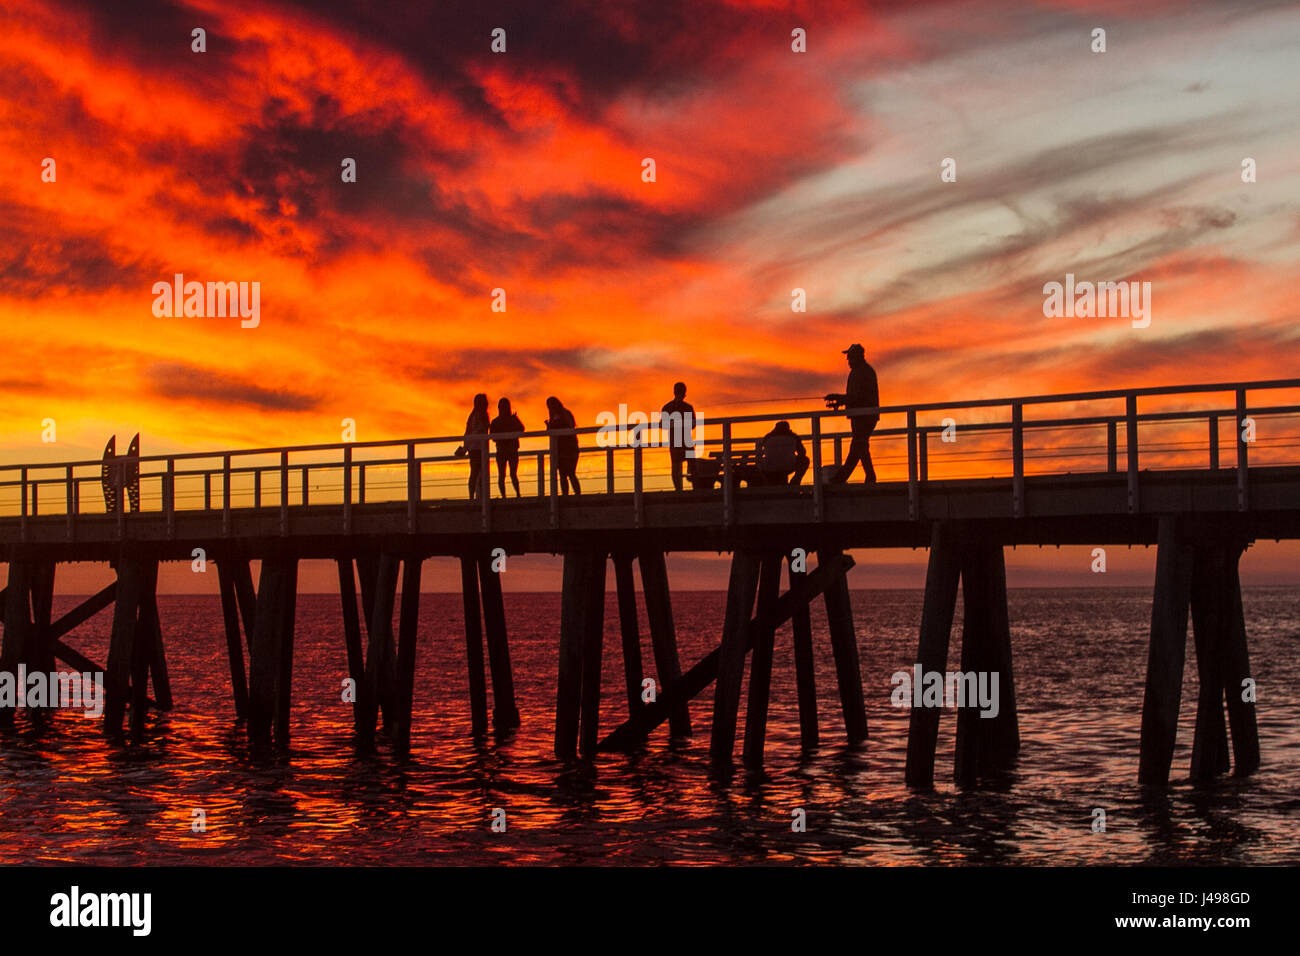 Adelaide, Australia. 11th May, 2017. A dramatic sunset develops over Adelaide beach from a jetty creating vibrant colours of pink and orange hues Credit: amer ghazzal/Alamy Live News  Stock Photo